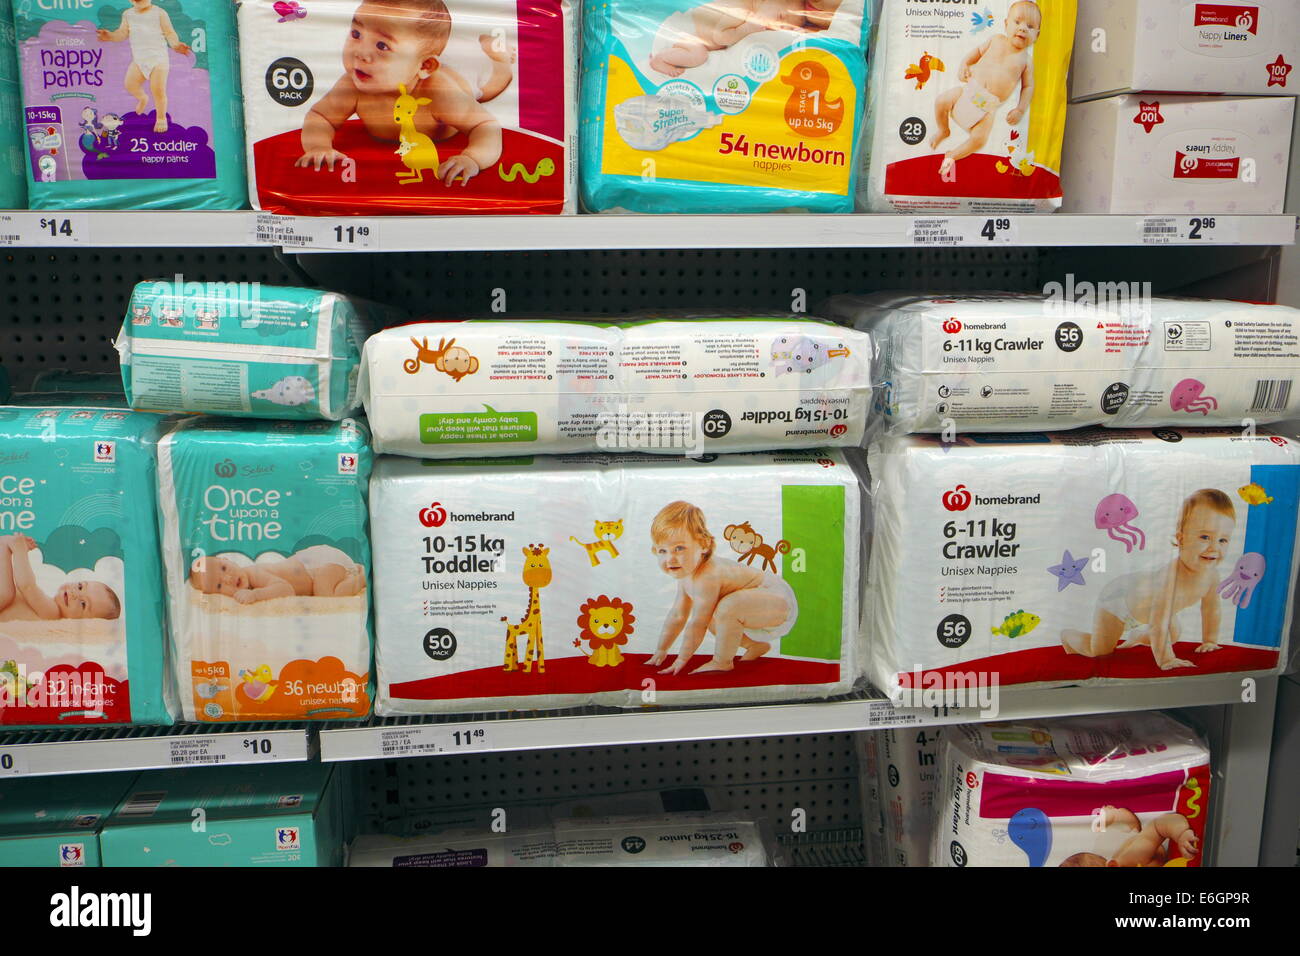 woolworths diapers